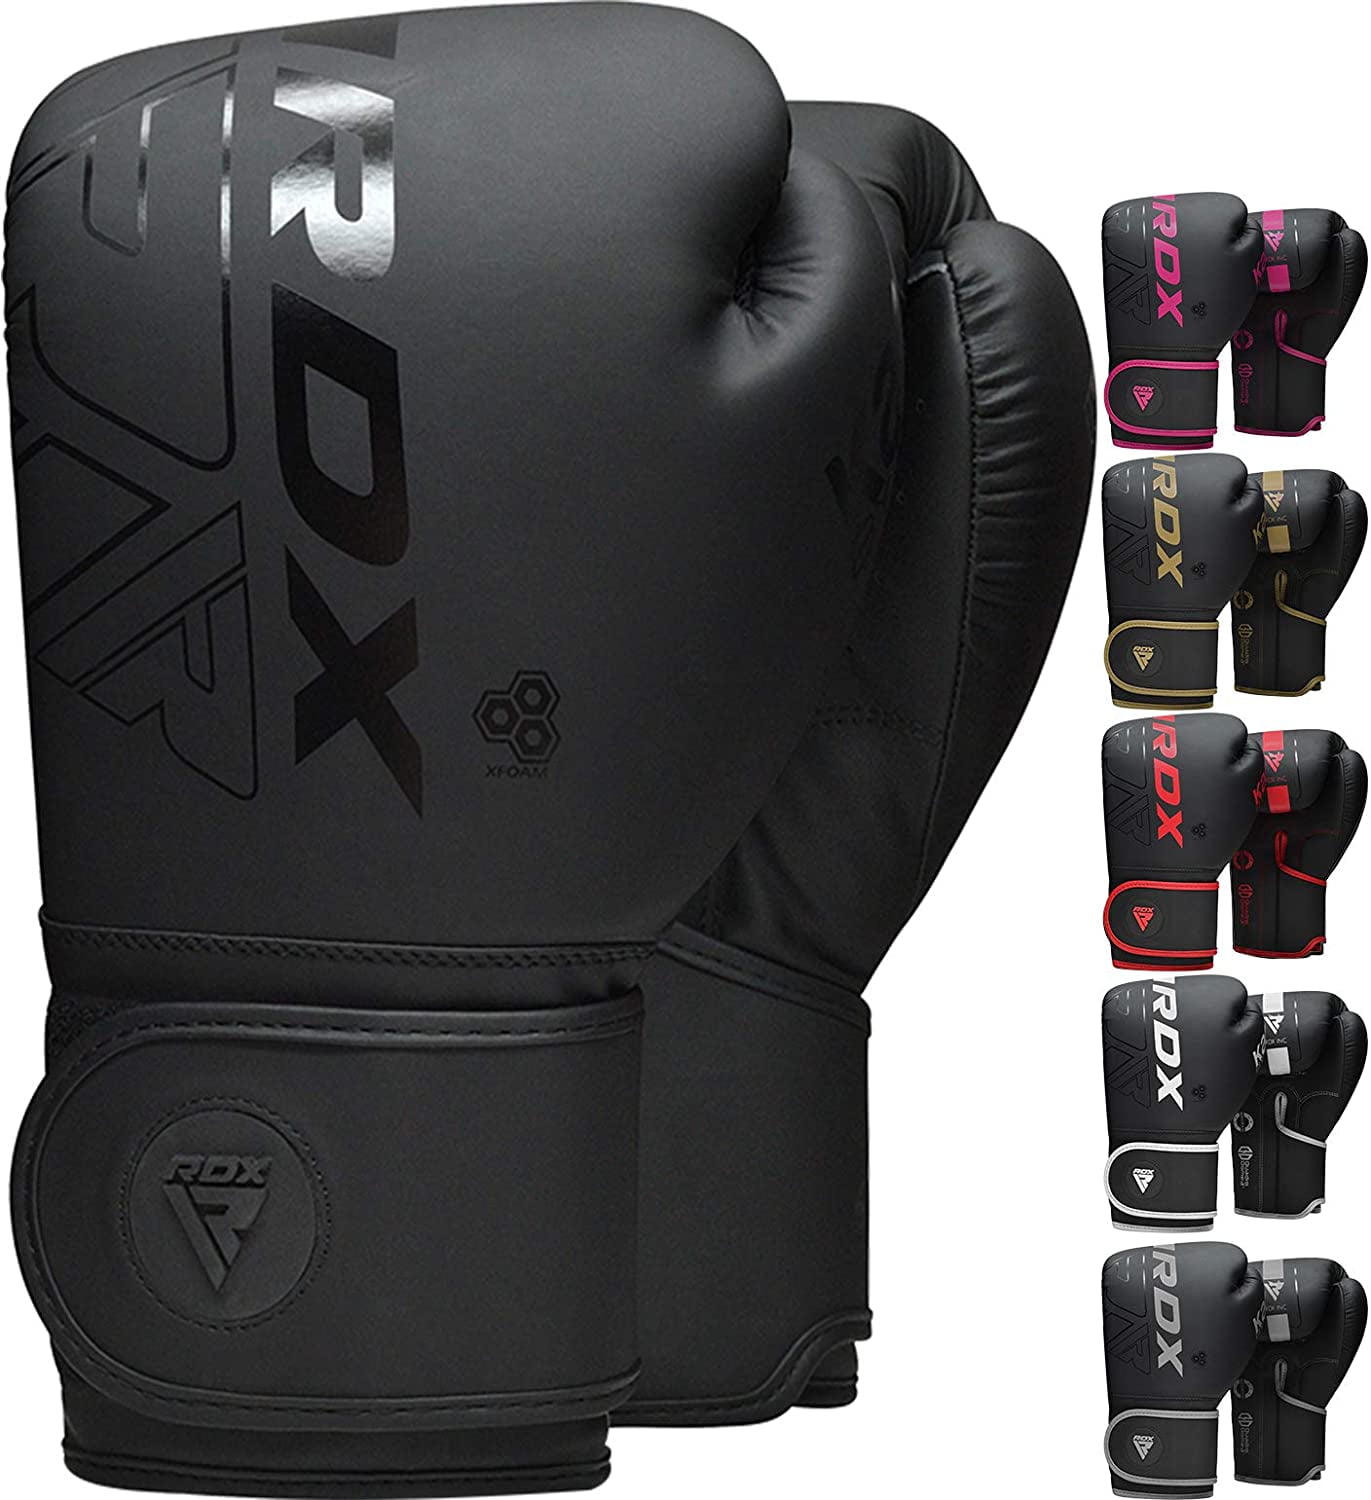 DEFY Challenger Punching Mitts Kickboxing Muay Thai MMA Boxing Pads Target Curved Gloves Training Hand Target for Kids Men & Women Youth 